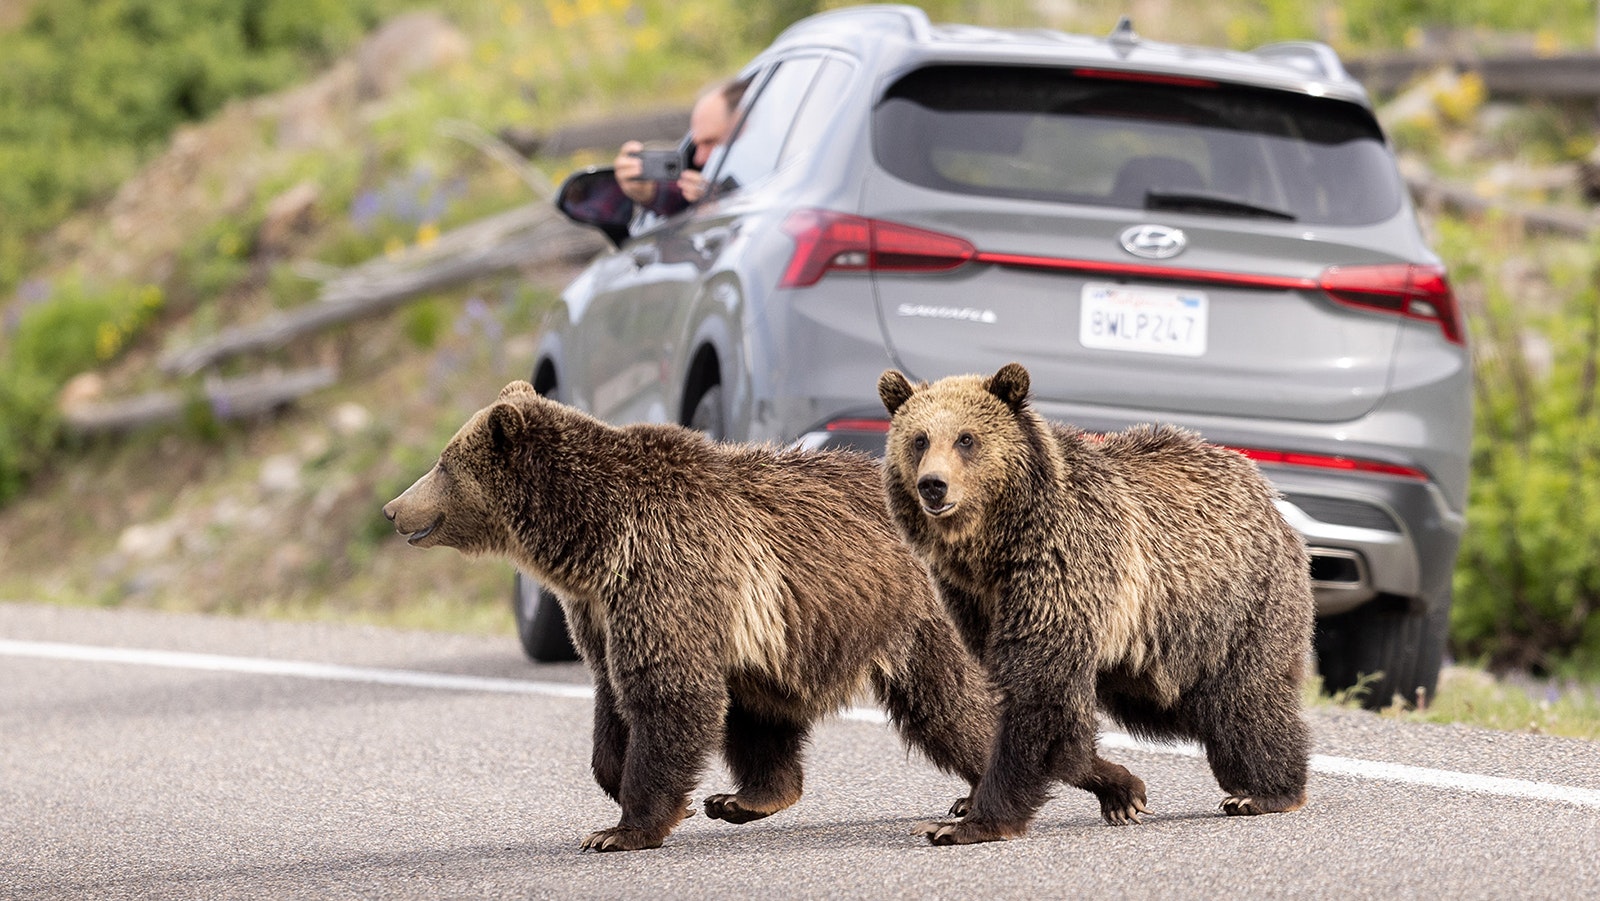 A mother grizzly bear and her three year old cub cross the road in Yellowstone. This mother bear, known as the Lake Butte Sow or Raspberry, is a prime example of a roadside female in the Yellowstone Ecosystem. Several female bears in the ecosystem have learned that male bears, who will kill cubs, are more wary around humans and tend to stay away from developed areas and roads. As a result, these females will stay close to the road in order to protect their cubs from male bears. The roadside females also provide a great opportunity for people to easily observe grizzly bears from the road, as shown here while the two cross the road.